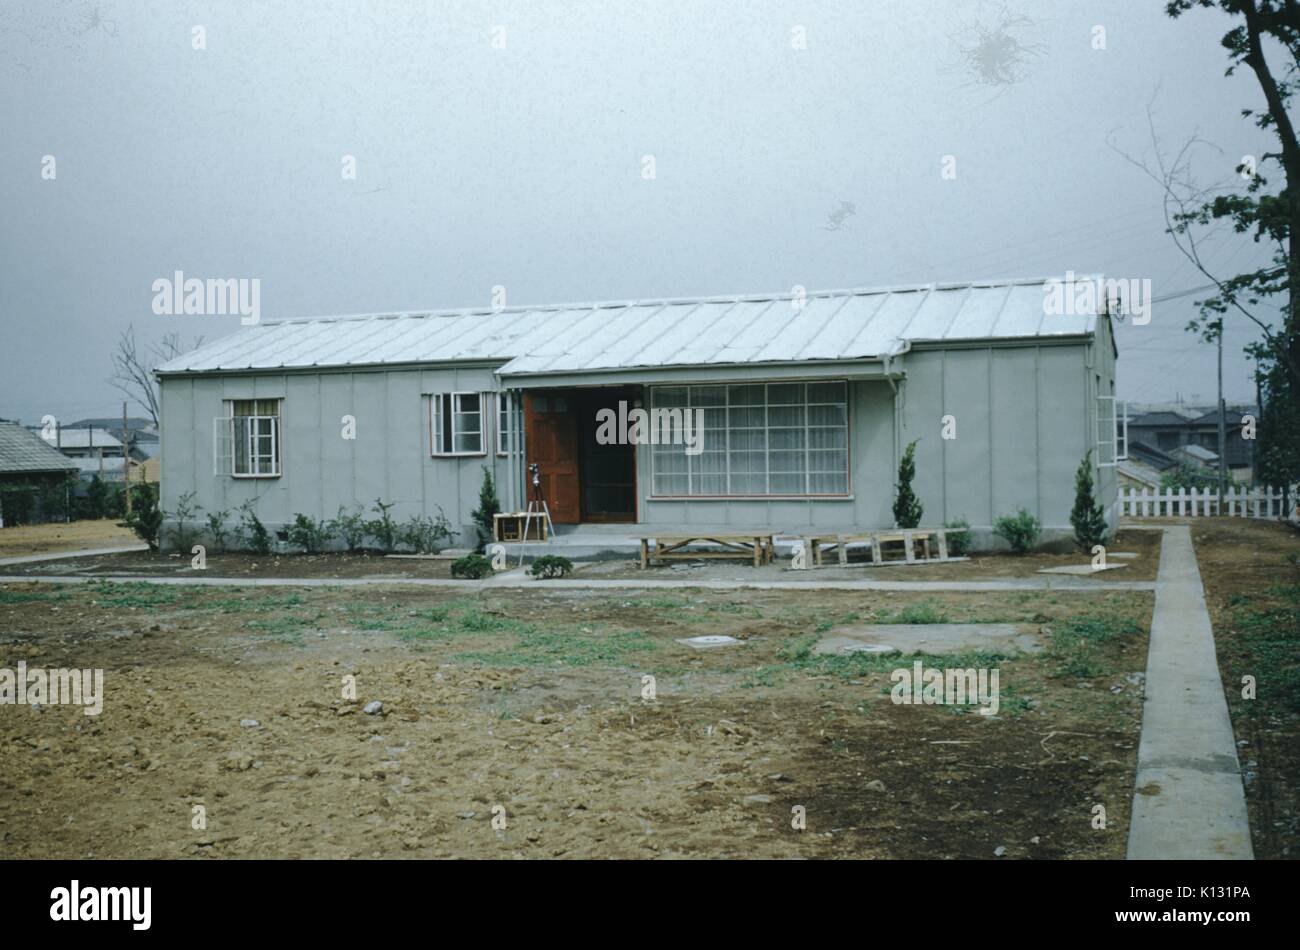 Ranch style home with path and trees, on an overcast day, at the Wesleyan Methodist Mission Compound, Japan, 1952. Stock Photo